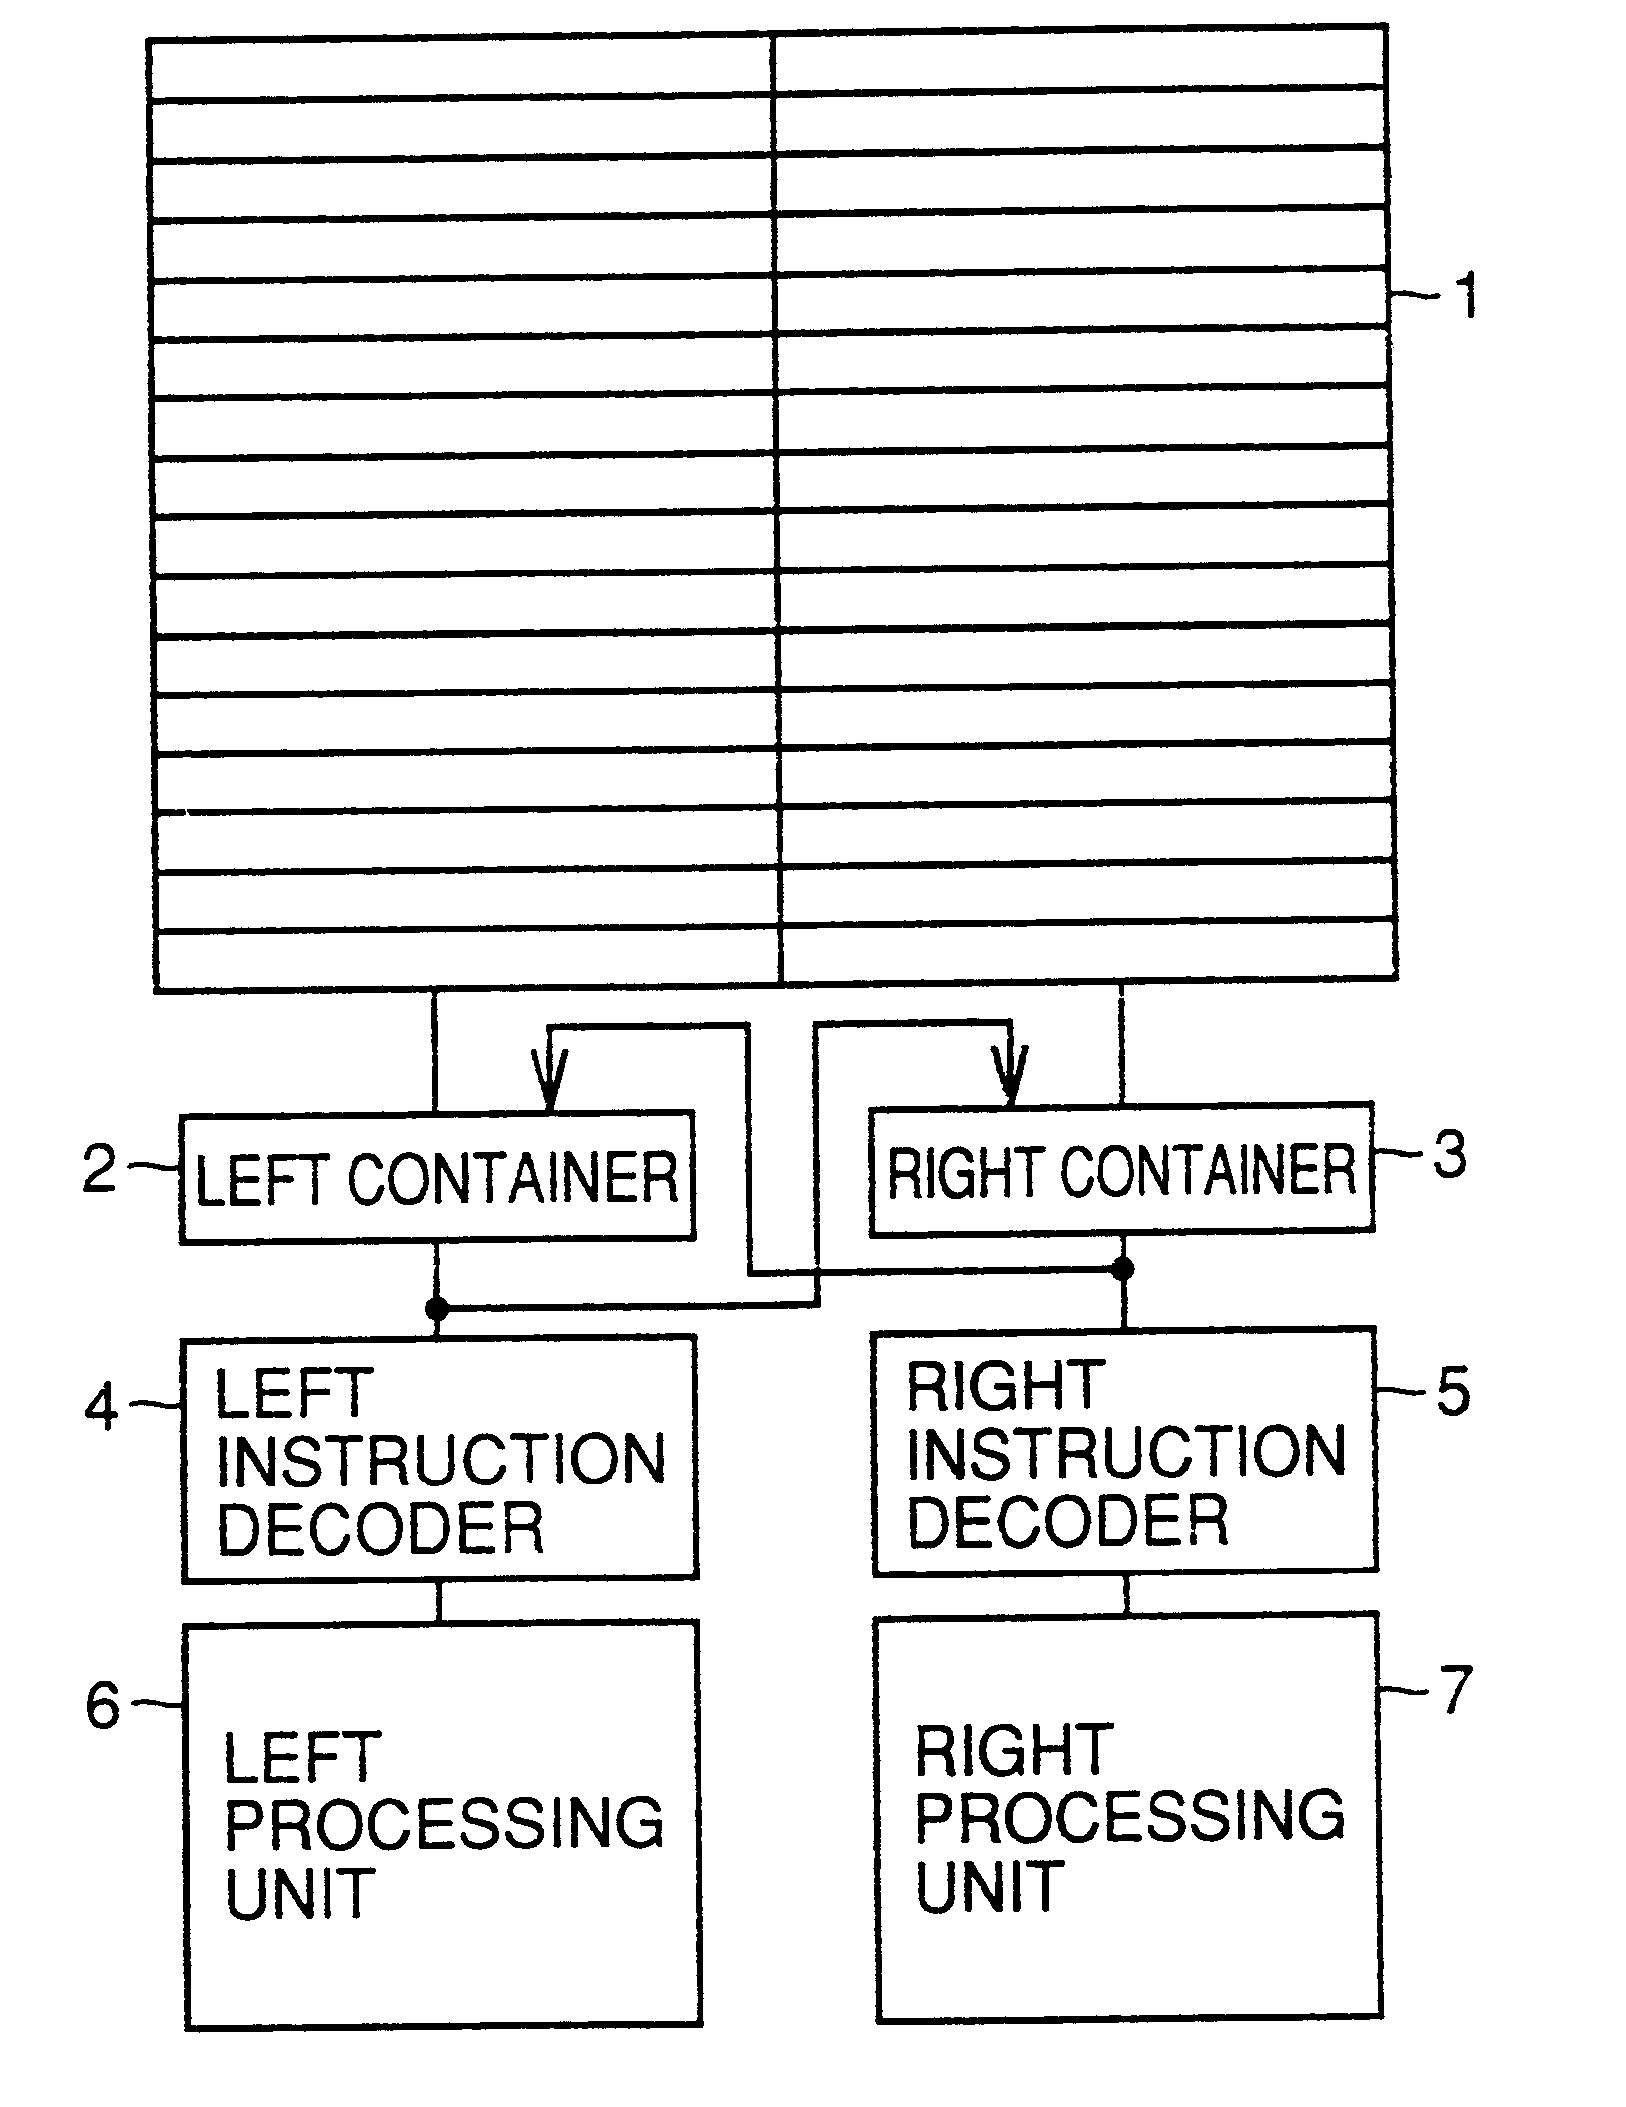 VLIW processor for exchanging and inputting sub-instructions to containers, and code compression device and method for compressing program code